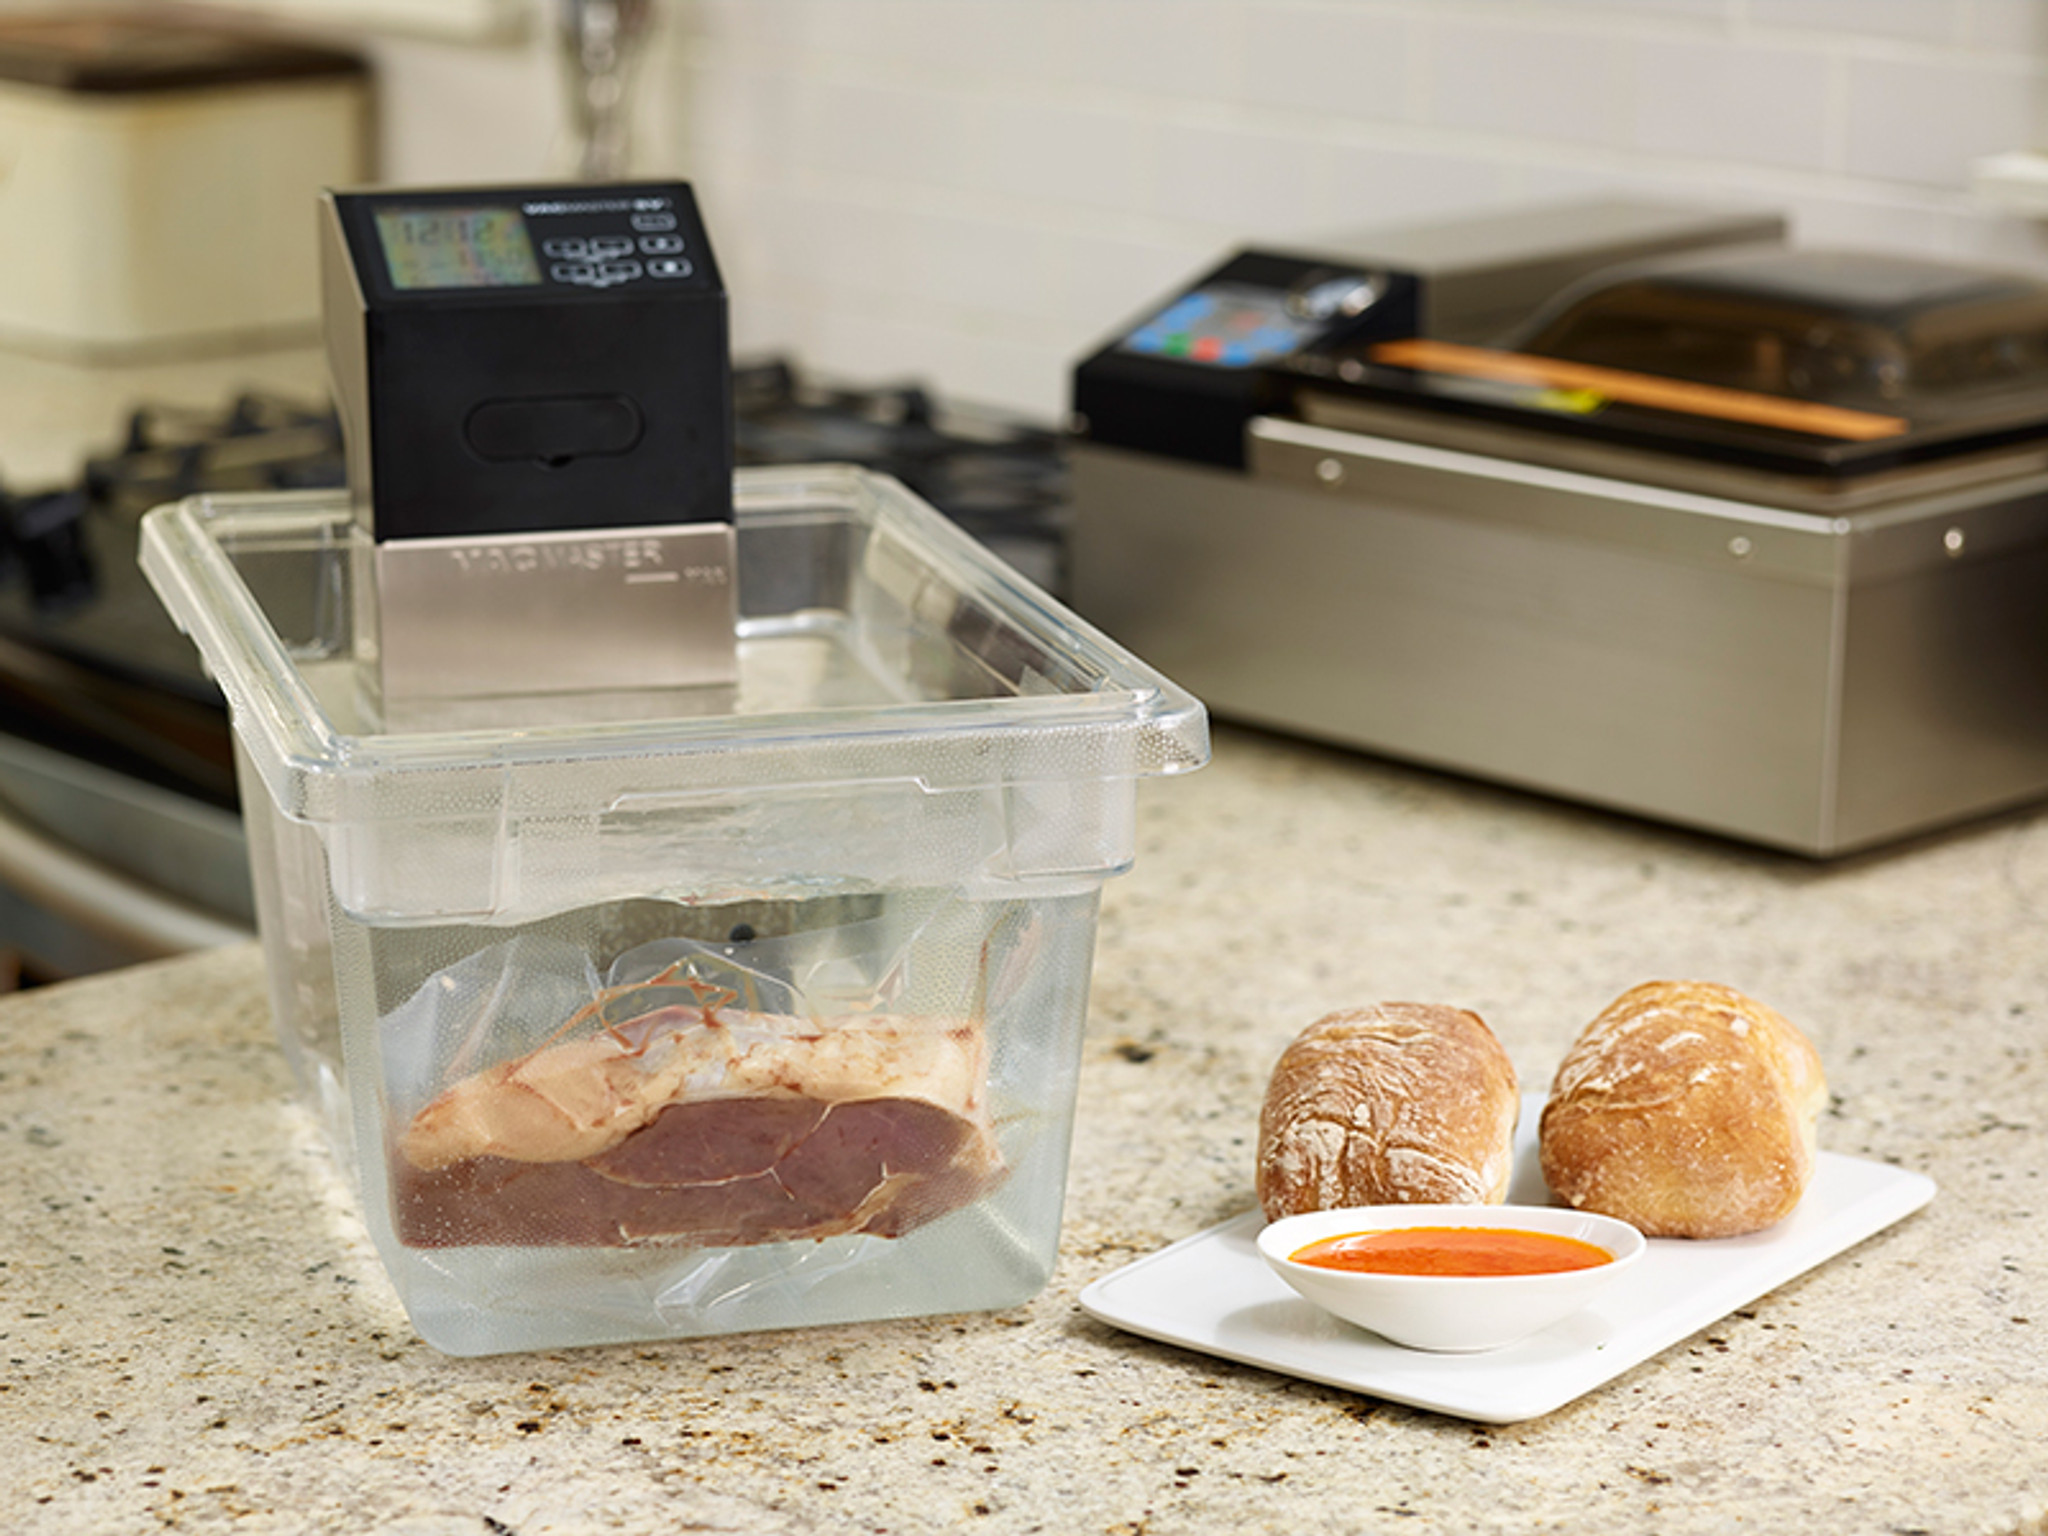 Sous Vide Circulator w/ Touchscreen And Safety Feature Blue 800W KG-SV1